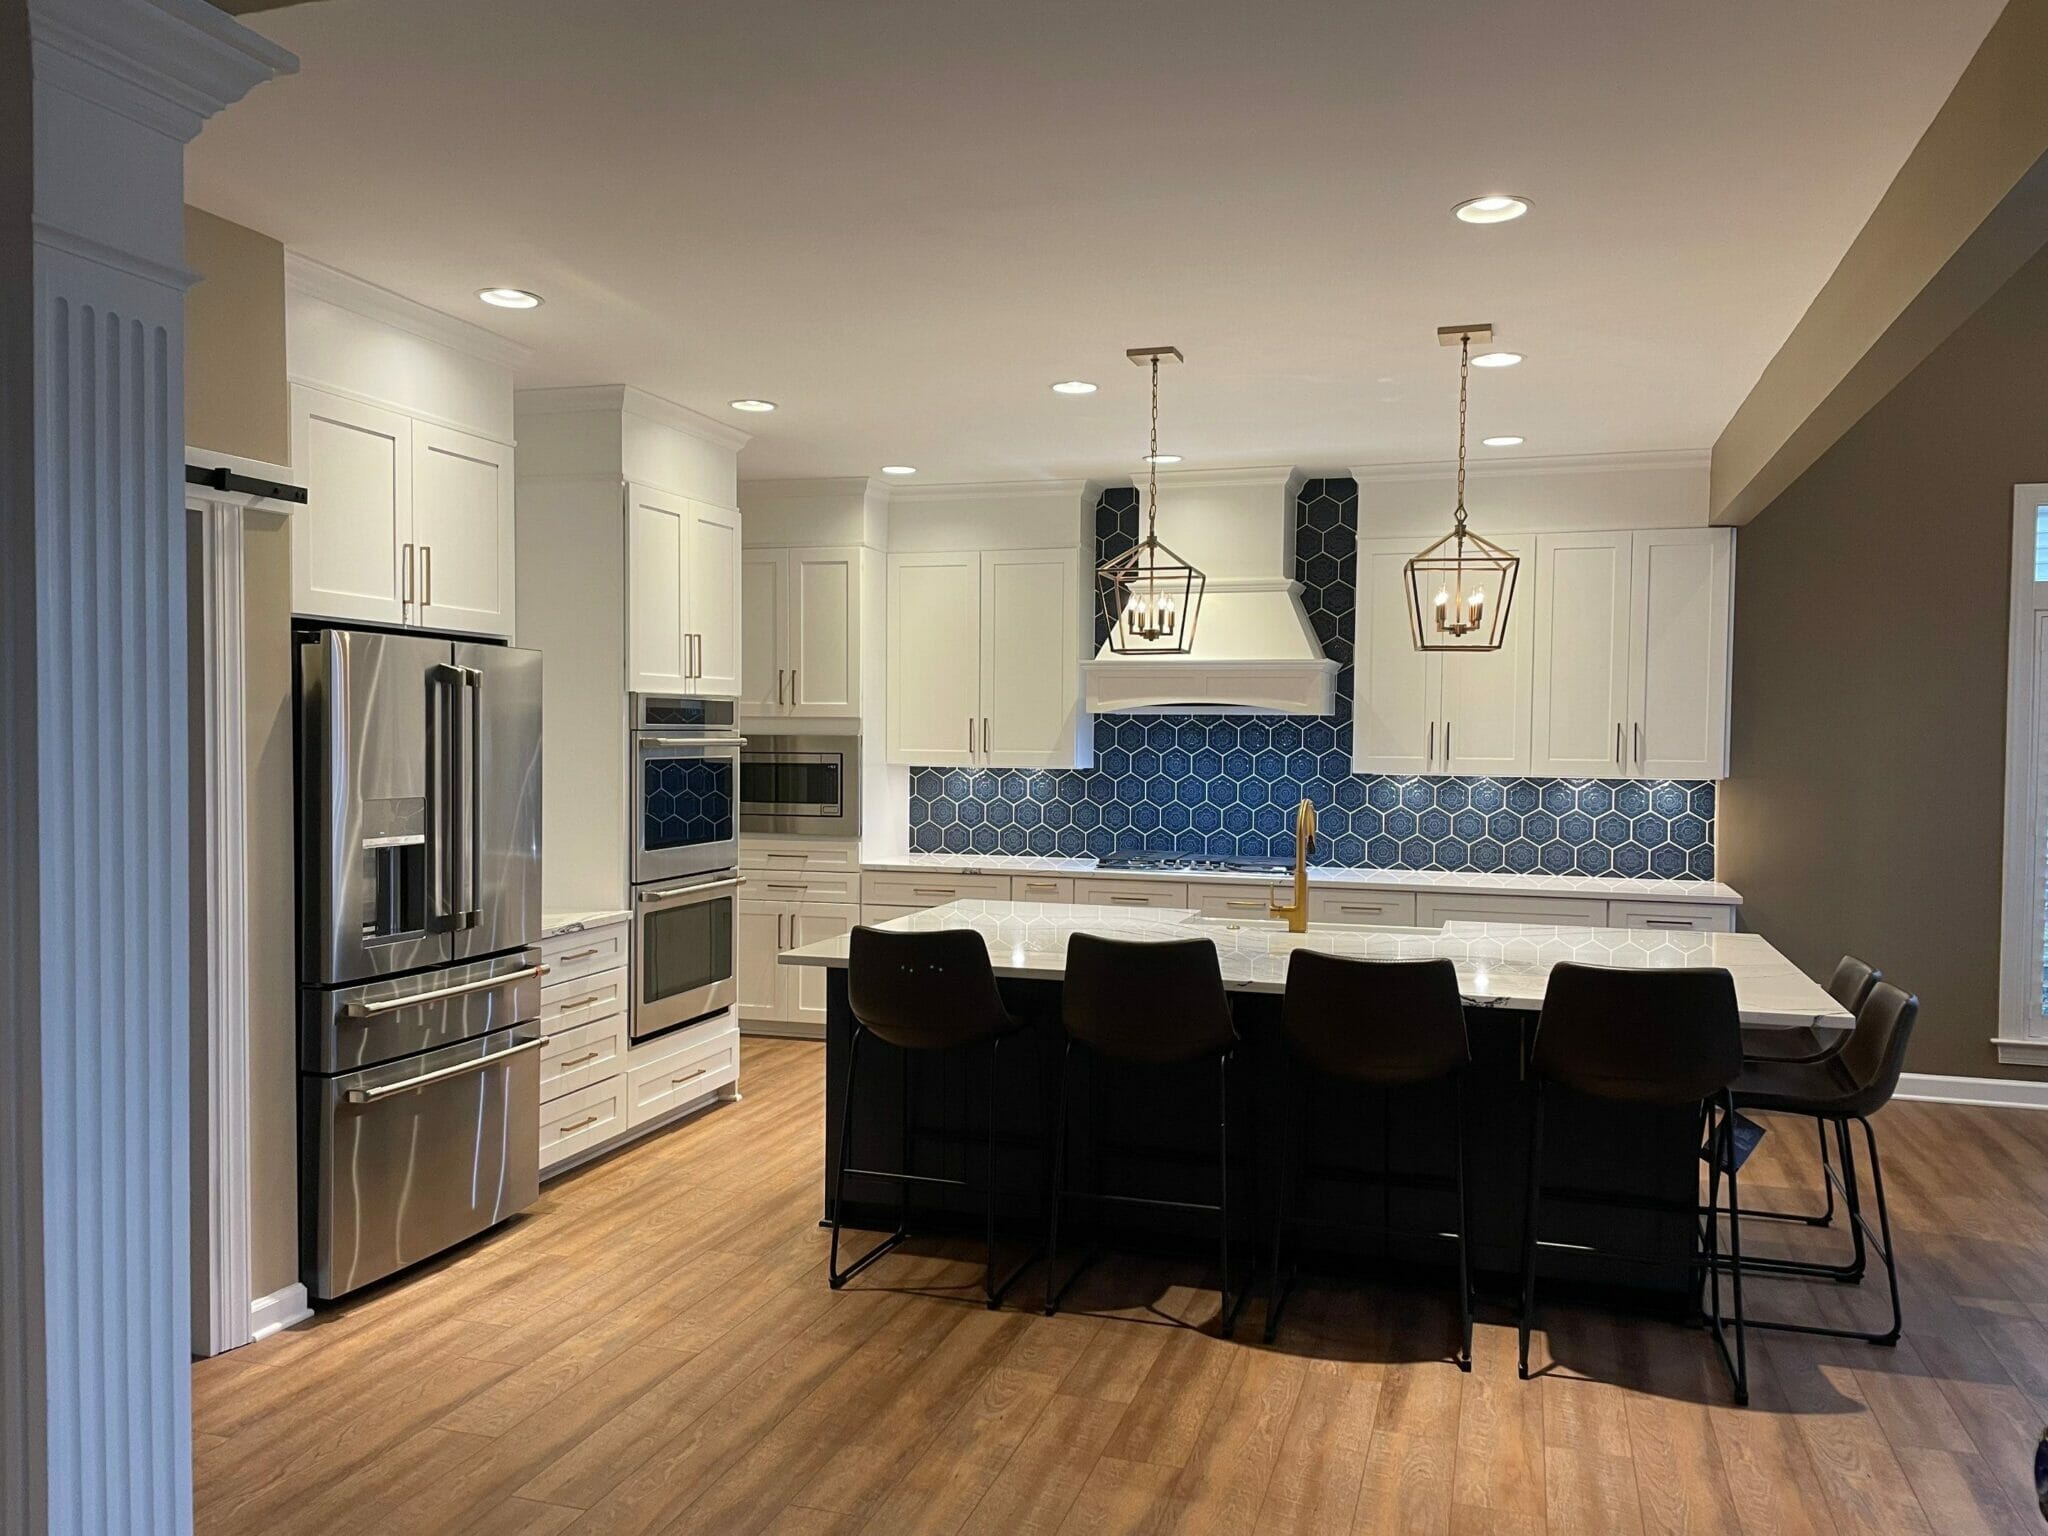 Newly remodeled kitchen in Maryland